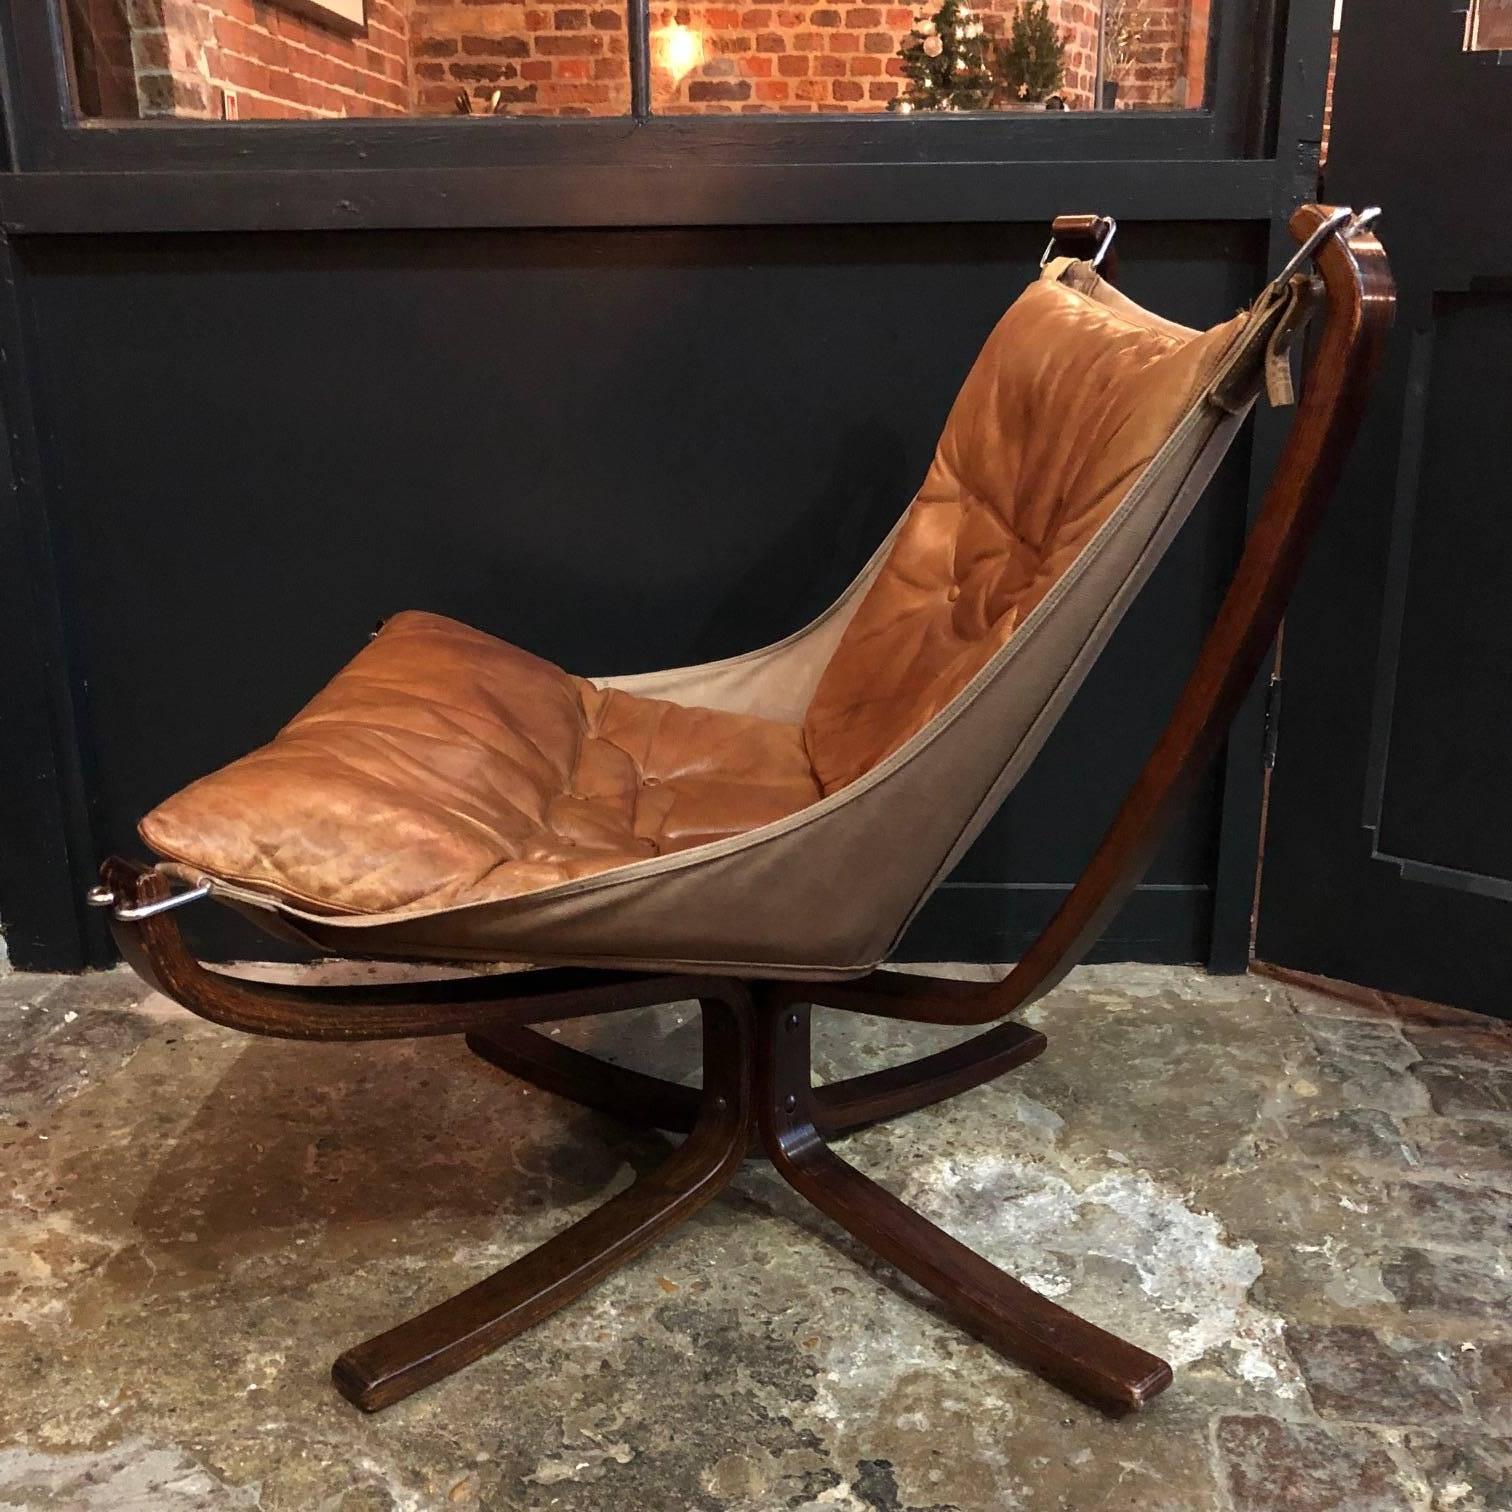 Vintage Low Back Black Leather Falcon Chair Designed by Sigurd Resell In Good Condition For Sale In Lewes, East Sussex